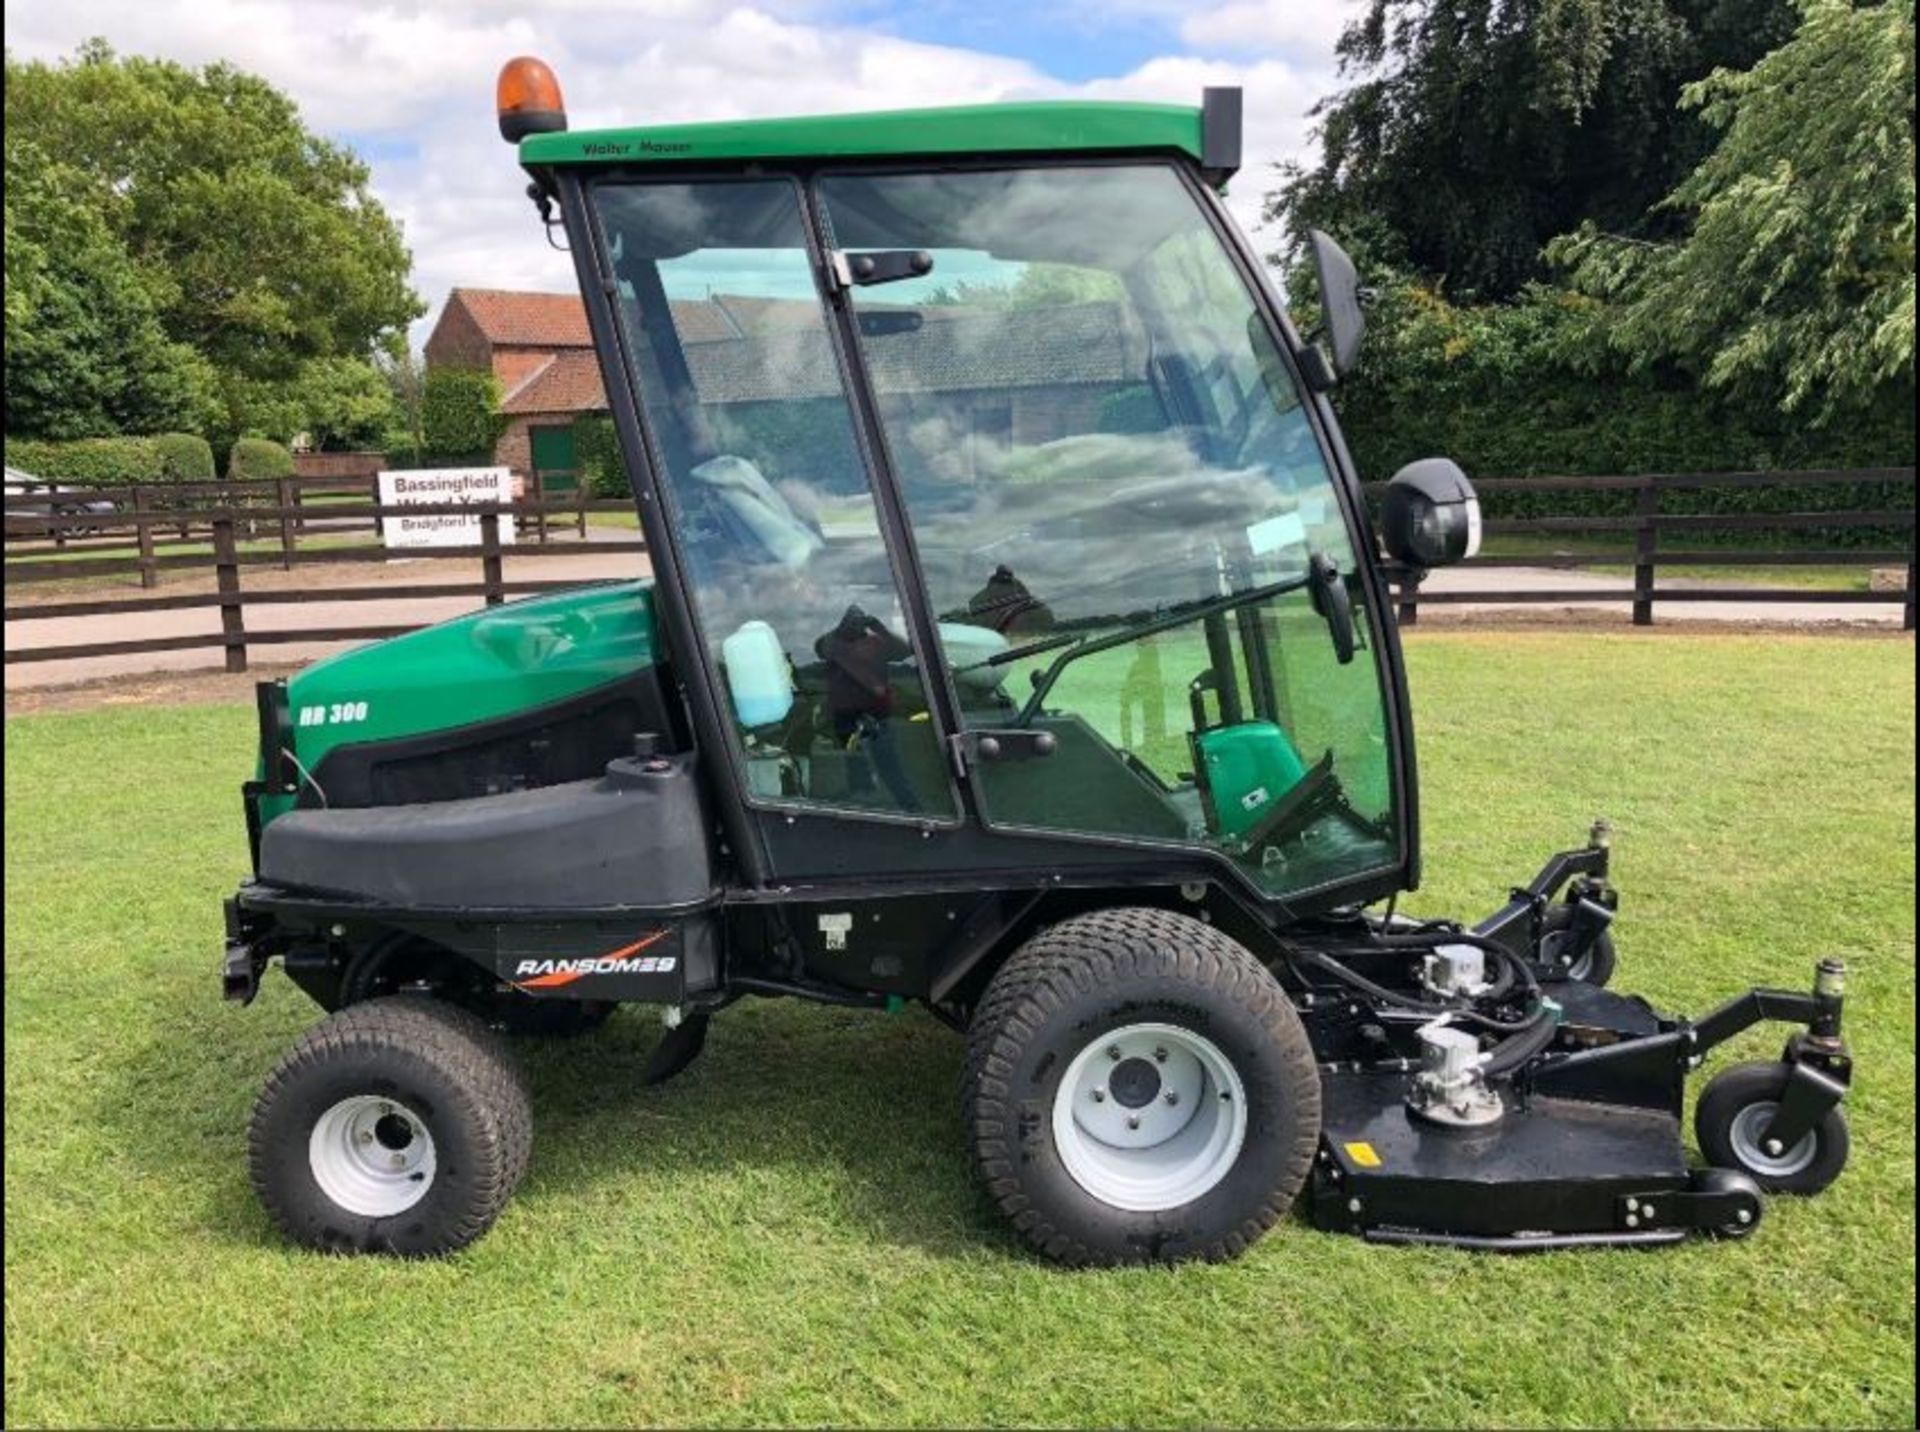 Ransomes HR300T upfront ride on rotary mower, Year 2012, 60" cut, road registered, 4 wheel drive.